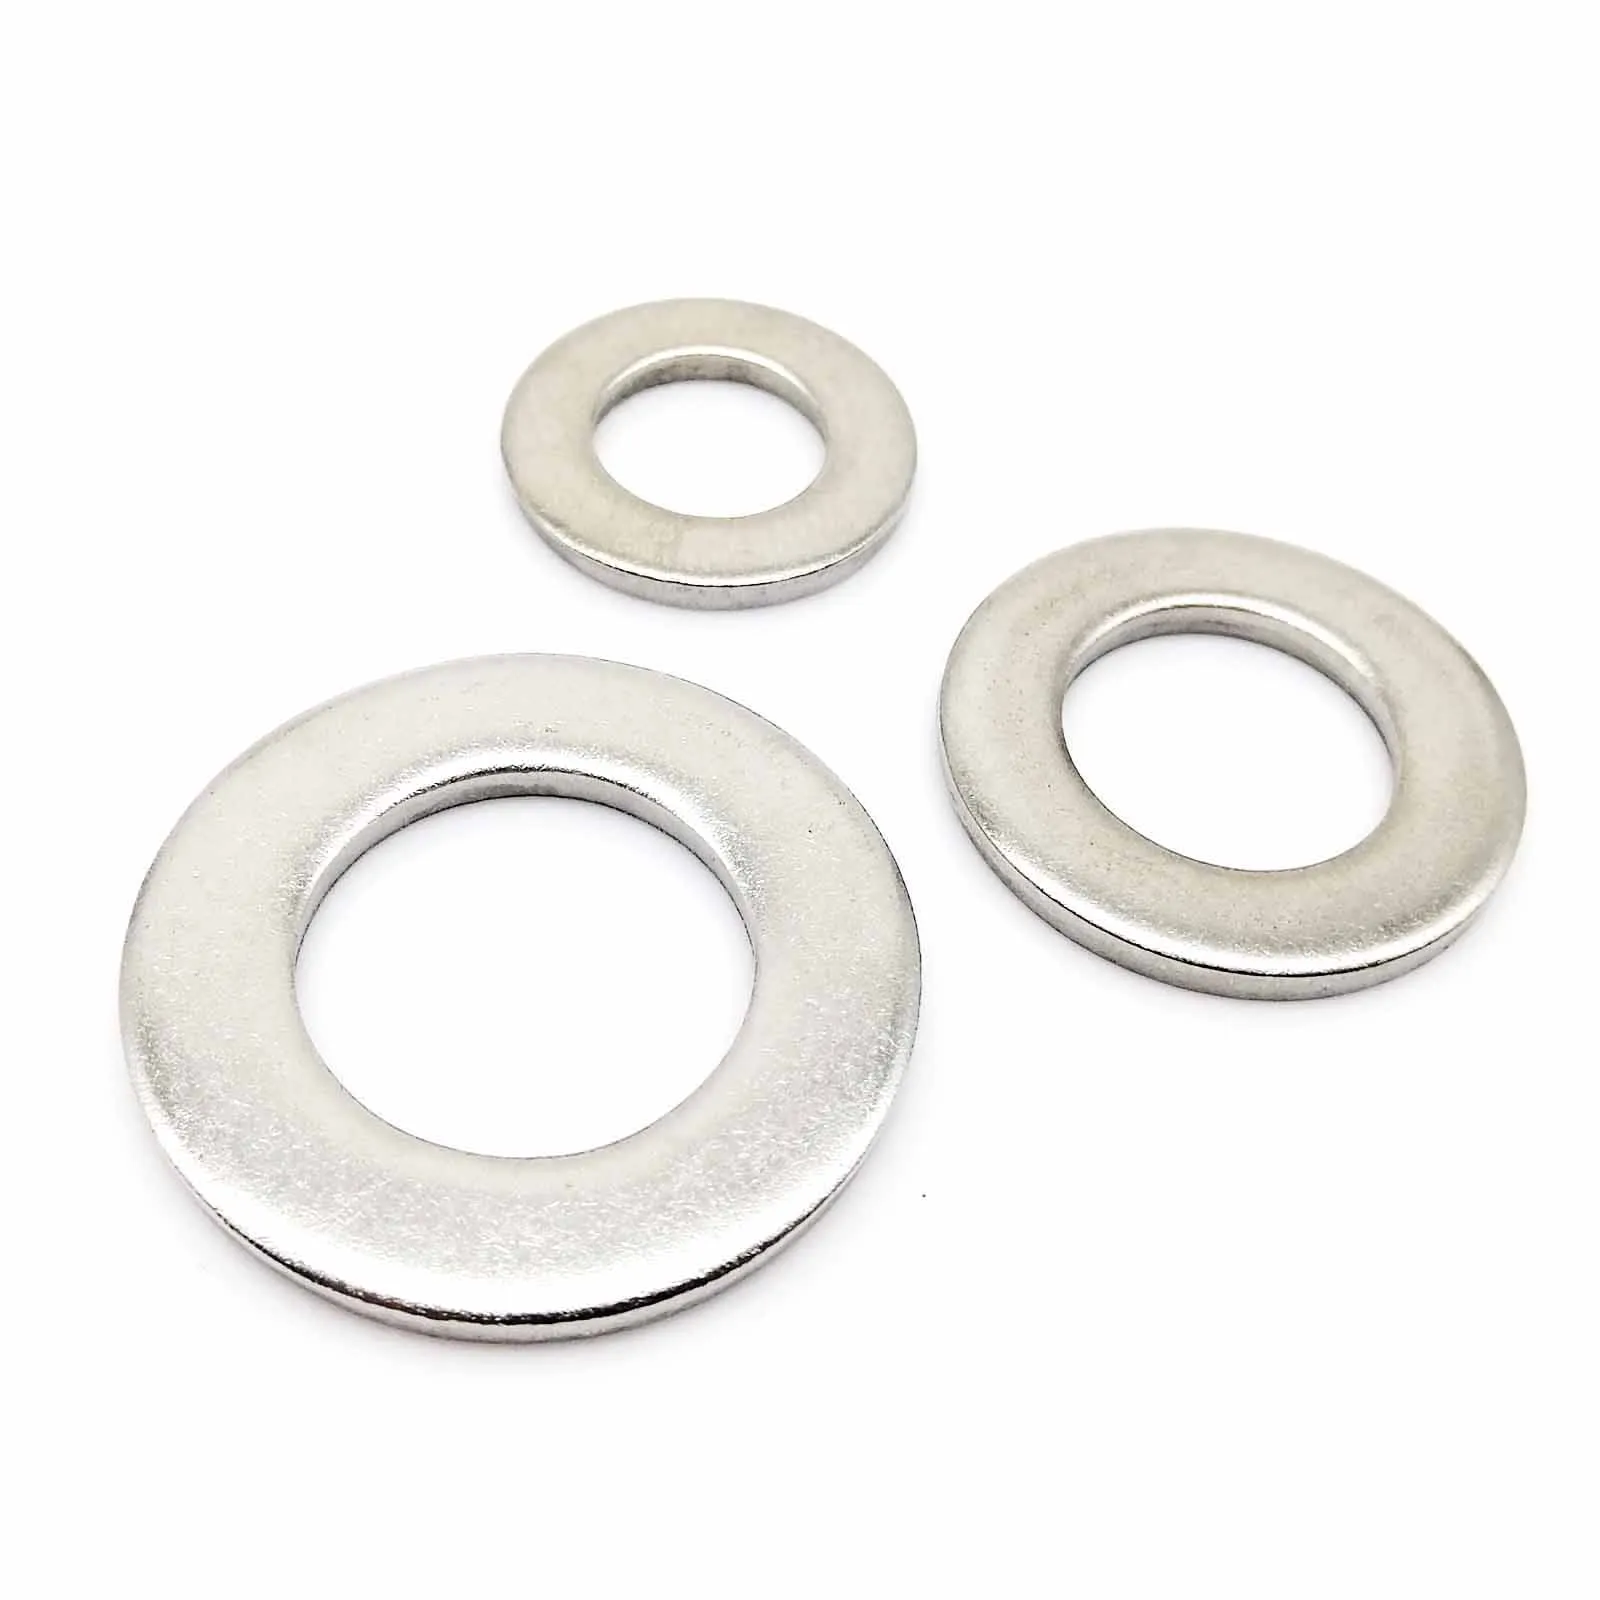 GB97 M1.6 M2 M2.5 M3 M3.5 M4 M5 M6 M8 M10 M12 M14 M16 to M24 High Quality A2-70 304 Stainless Steel Flat Washer Plain Gasket